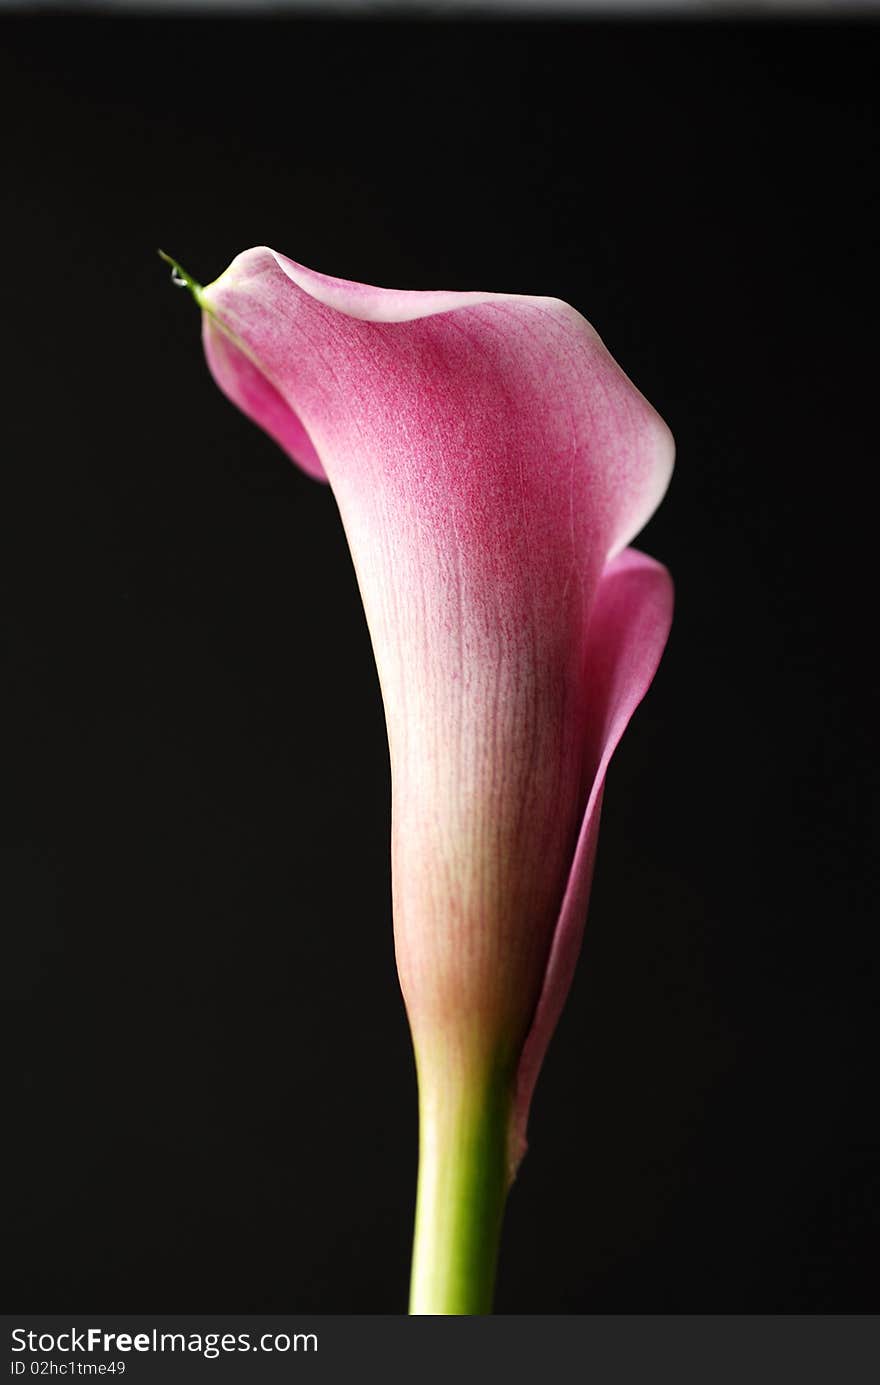 Calla lily with a drop of water on black background. Calla lily with a drop of water on black background